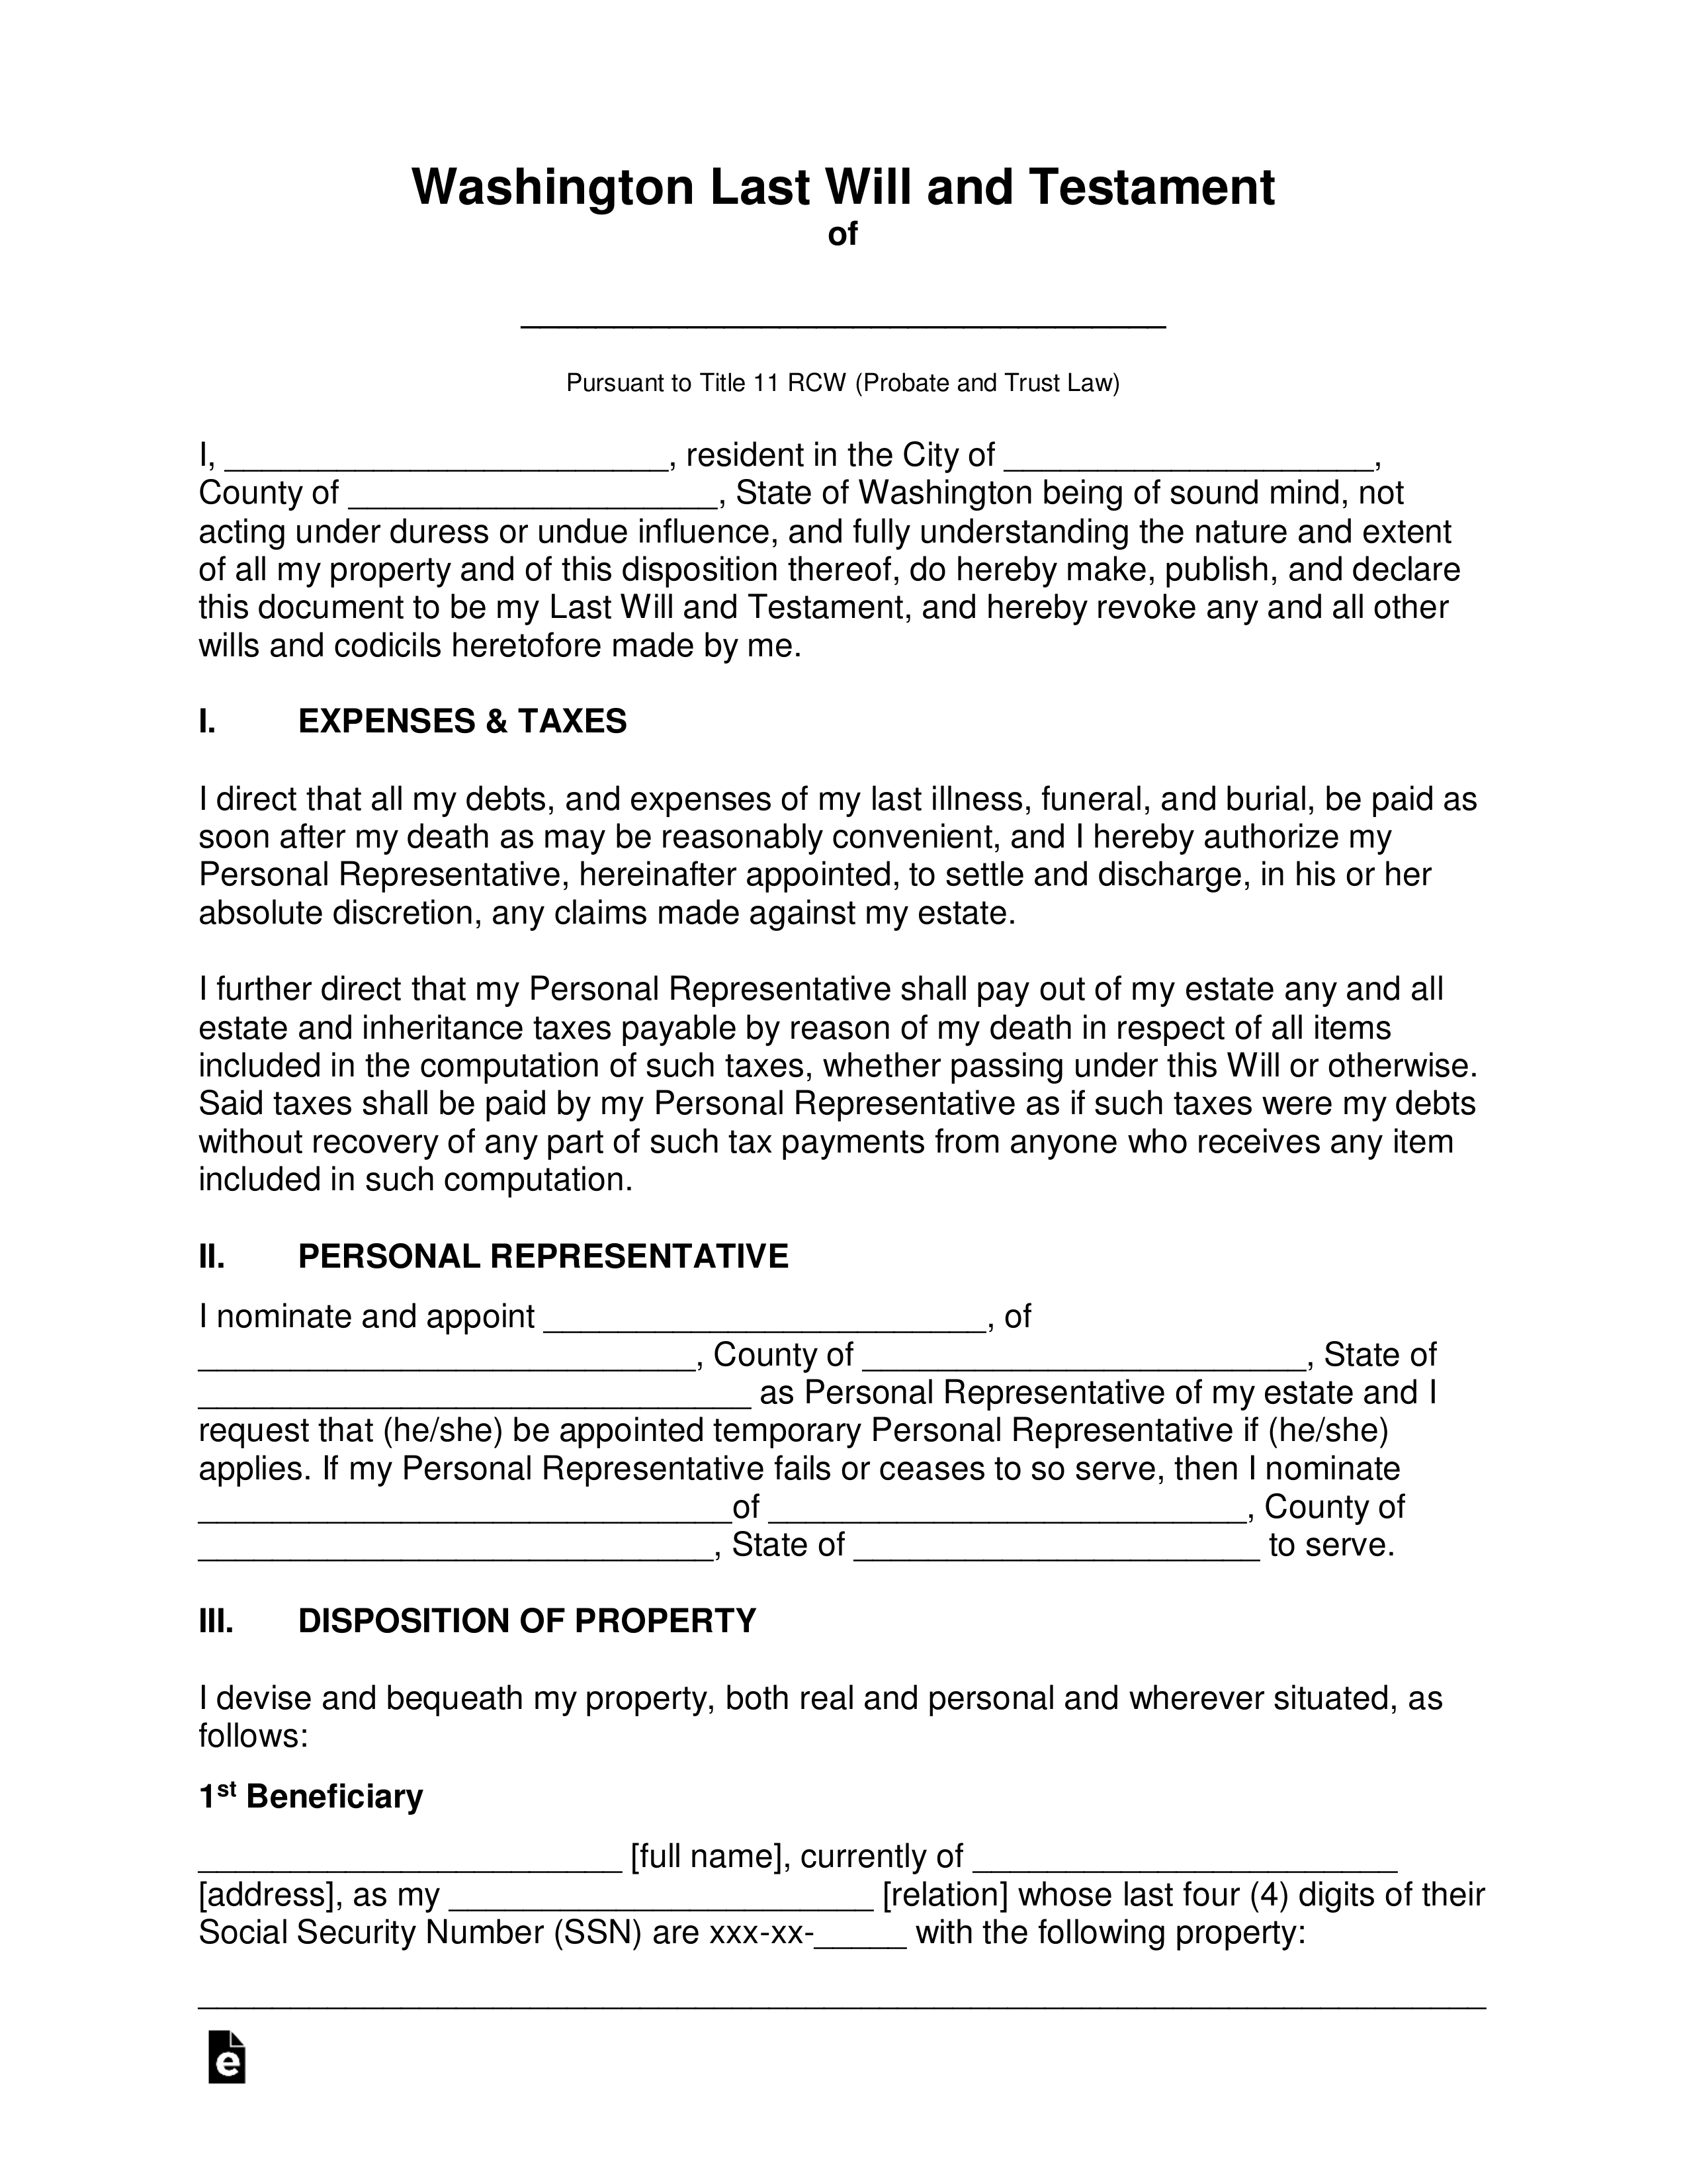 Free Washington Last Will And Testament Template - Pdf | Word – Eforms within Free Printable Living Will Forms Washington State